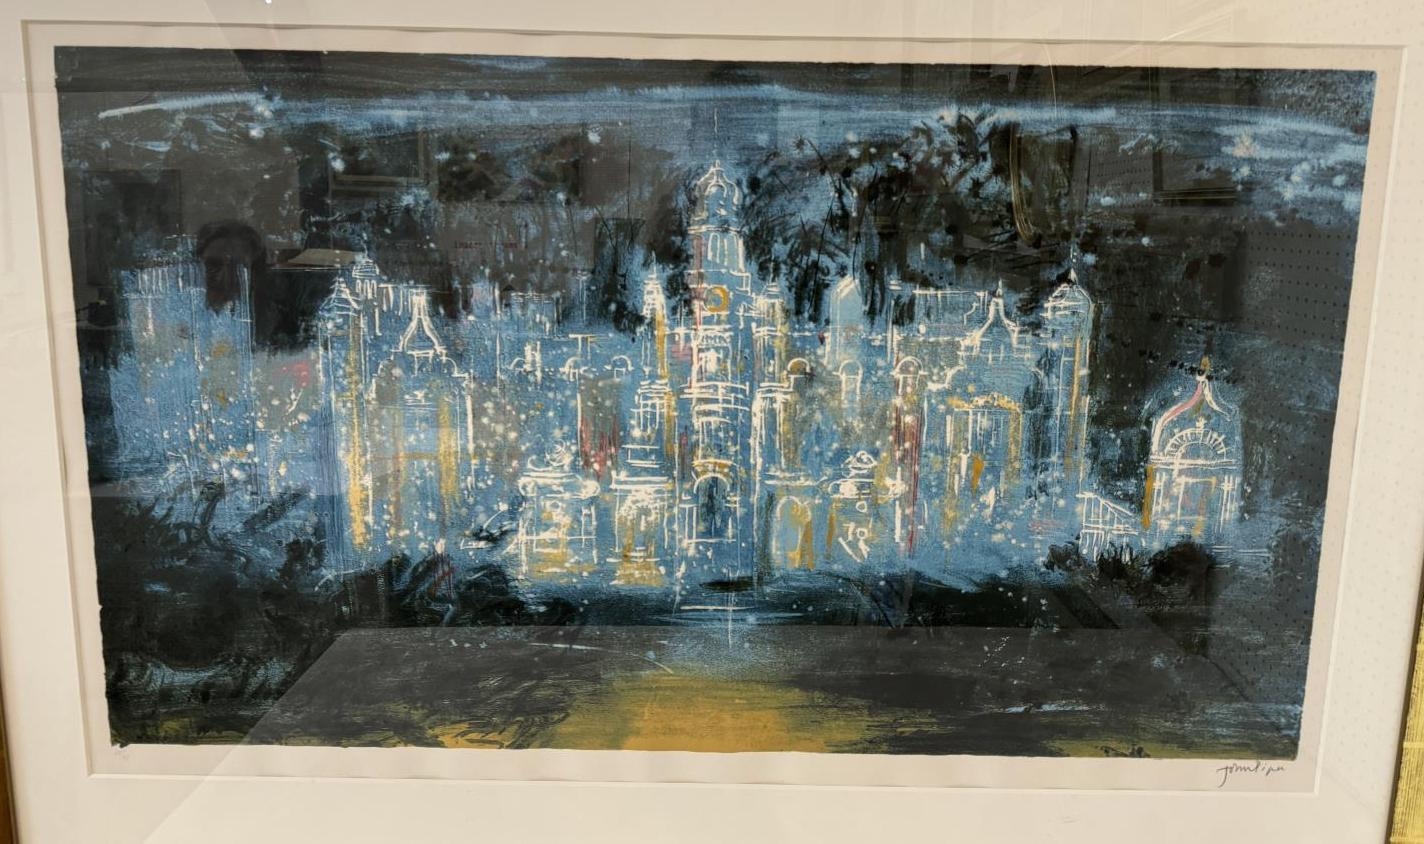 John Piper (British, 1903-1992) - 'Harlaxton (blue)' (1977), limited edition screenprint in colours, - Image 2 of 10